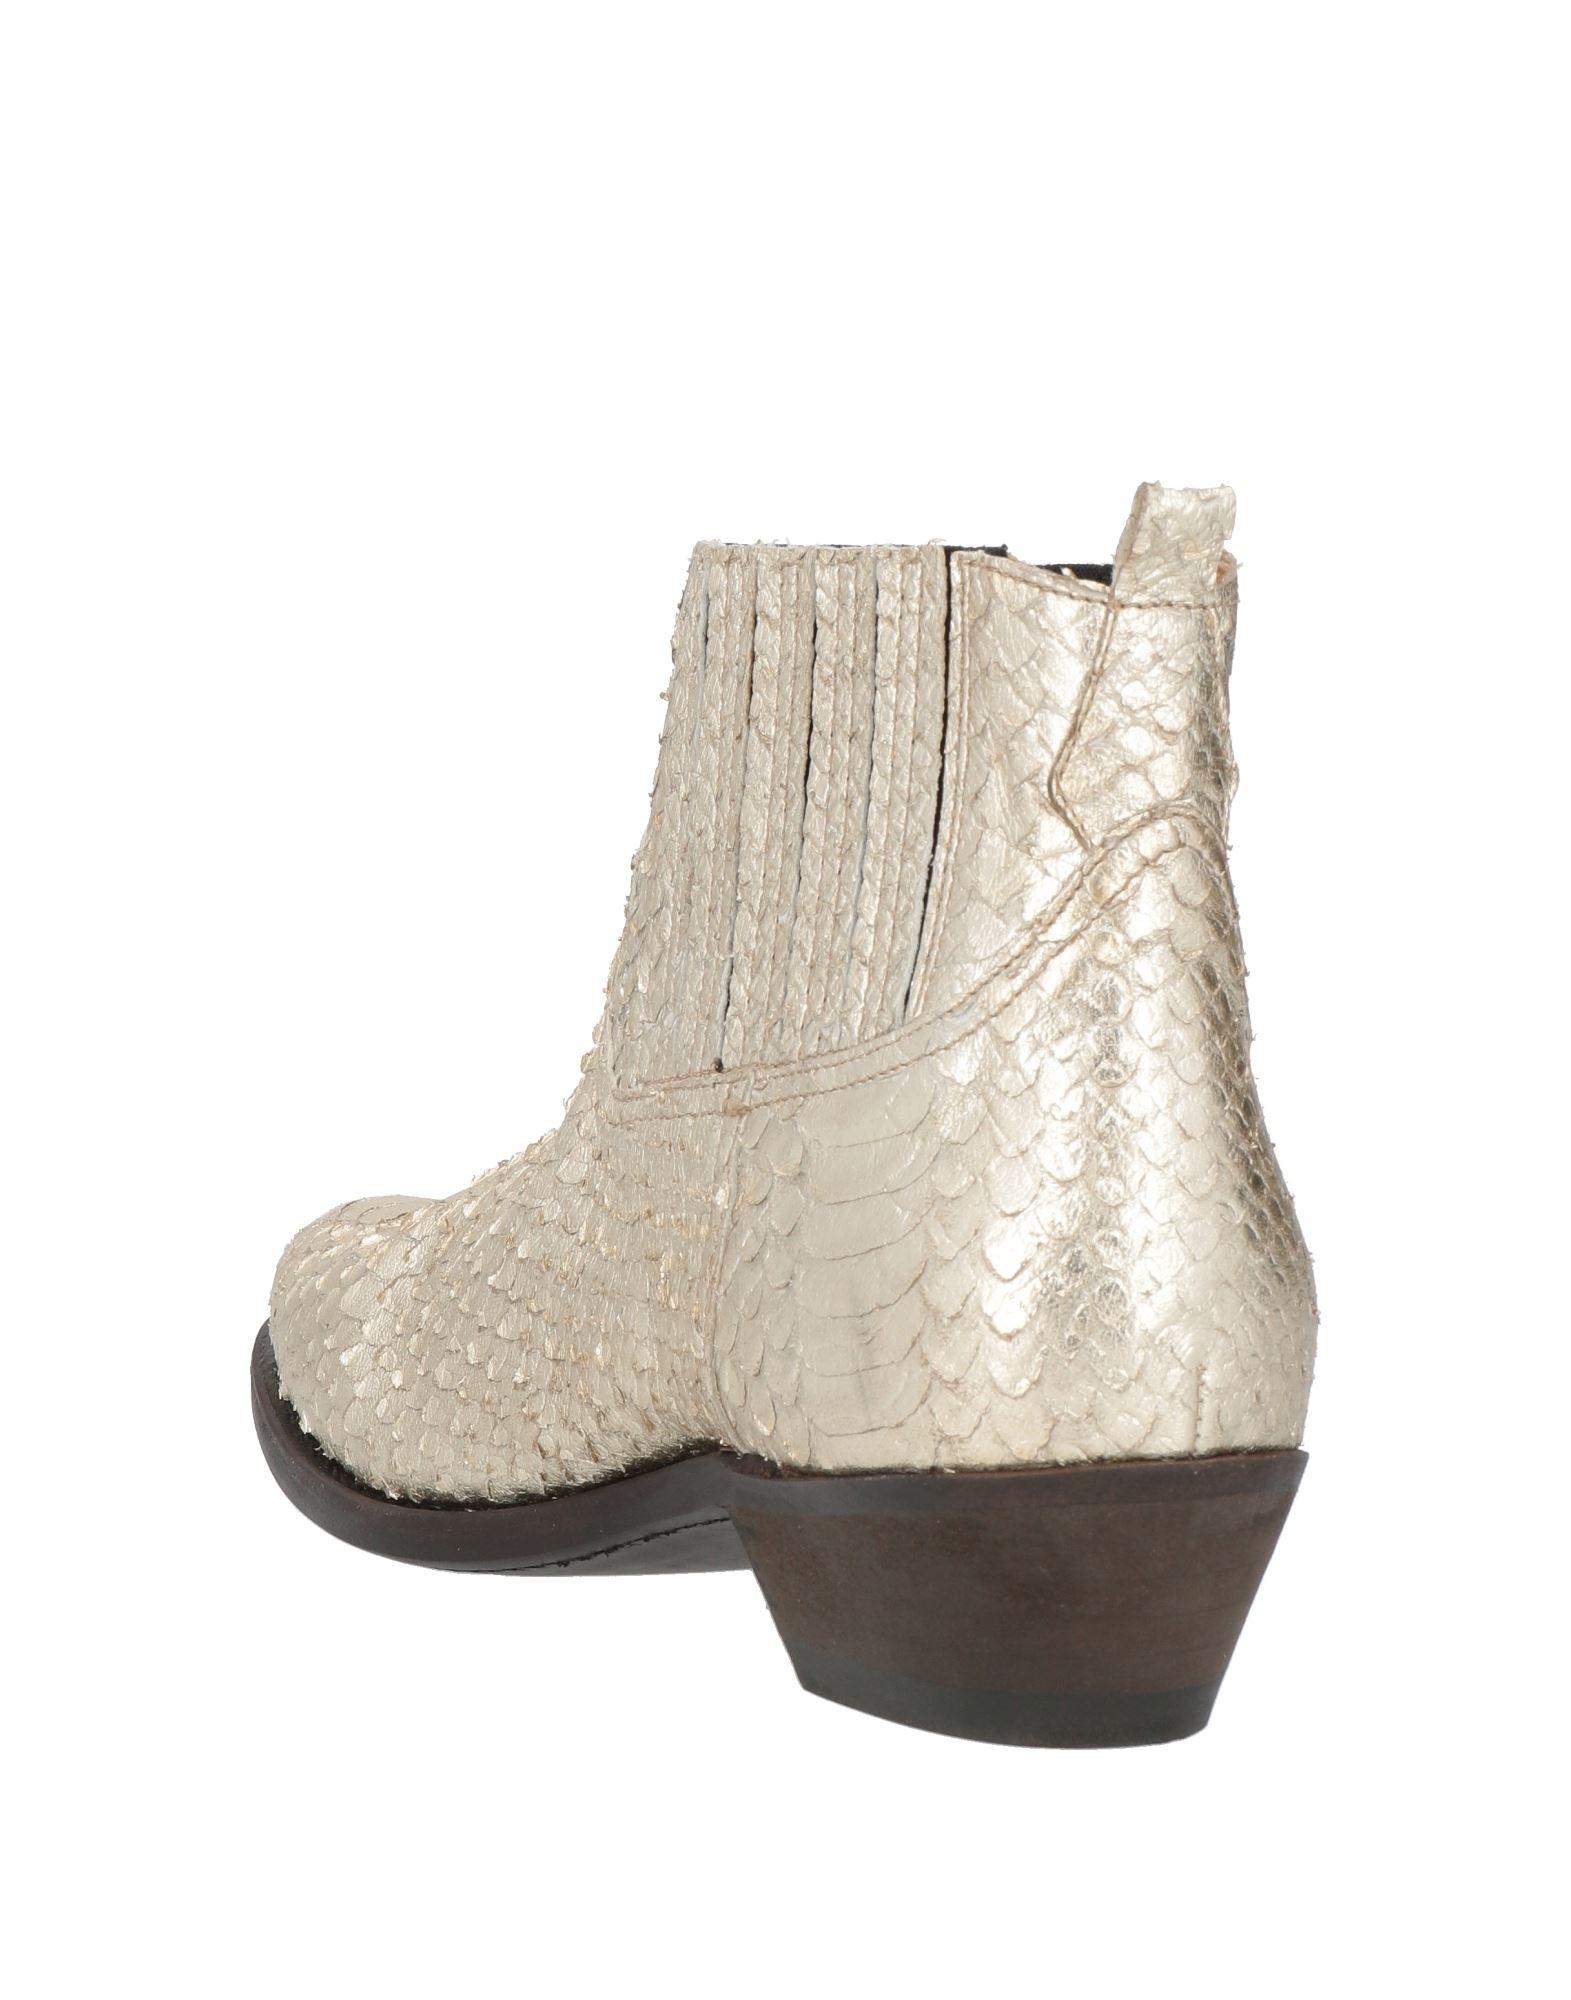 Goose Ankle Boots in Natural | Lyst